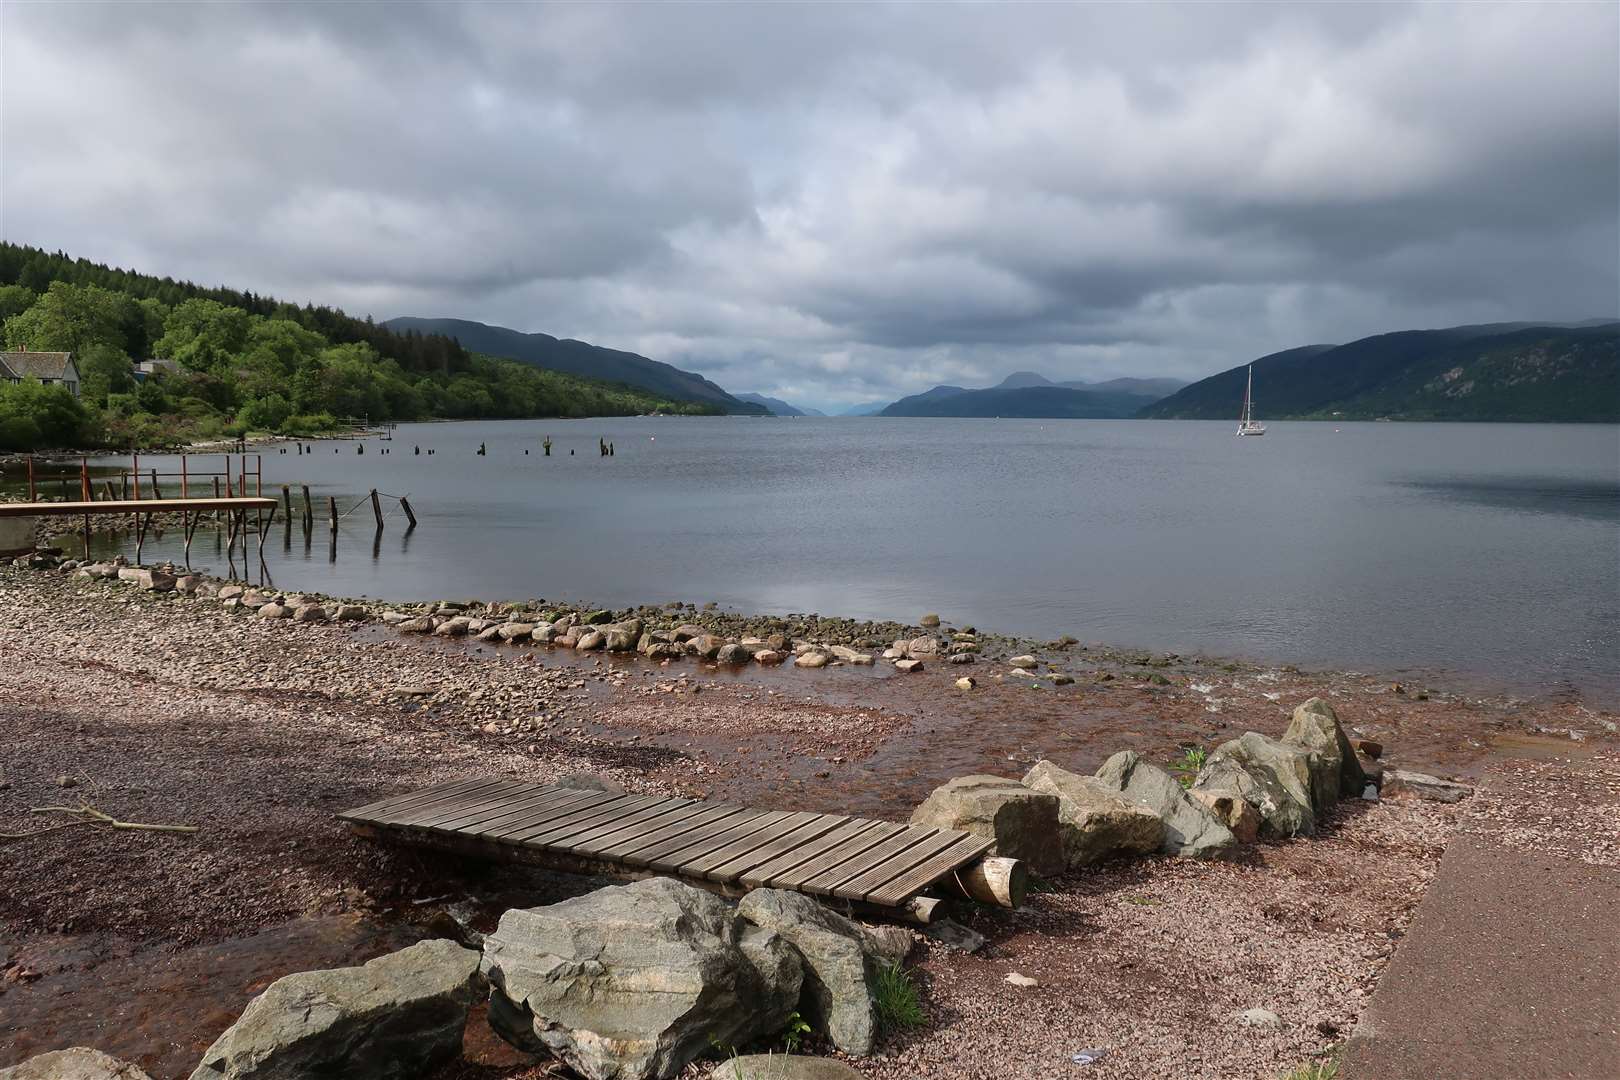 The group are believed to have been sailing near Dores.